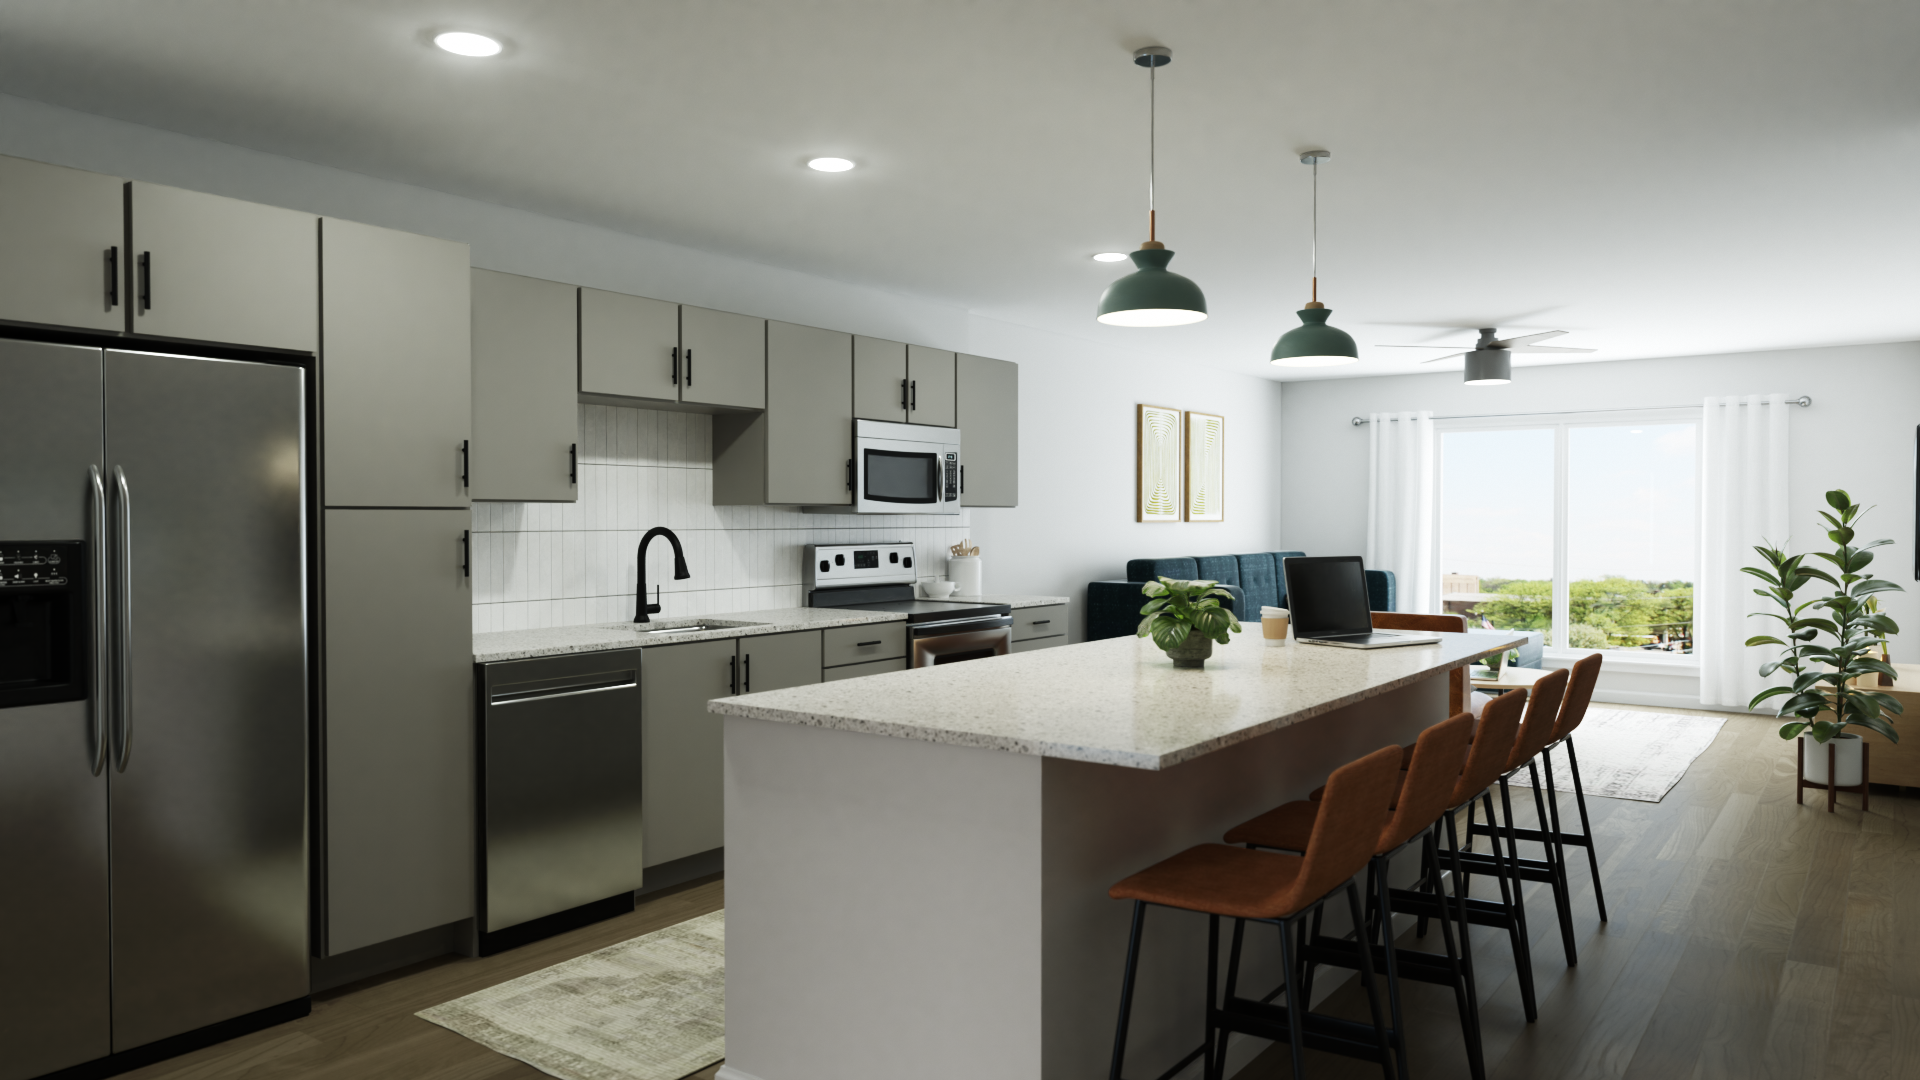 Representative rendering of kitchen areas at Rambler, featuring tile backsplash, stainless steel appliances and quartz countertops.